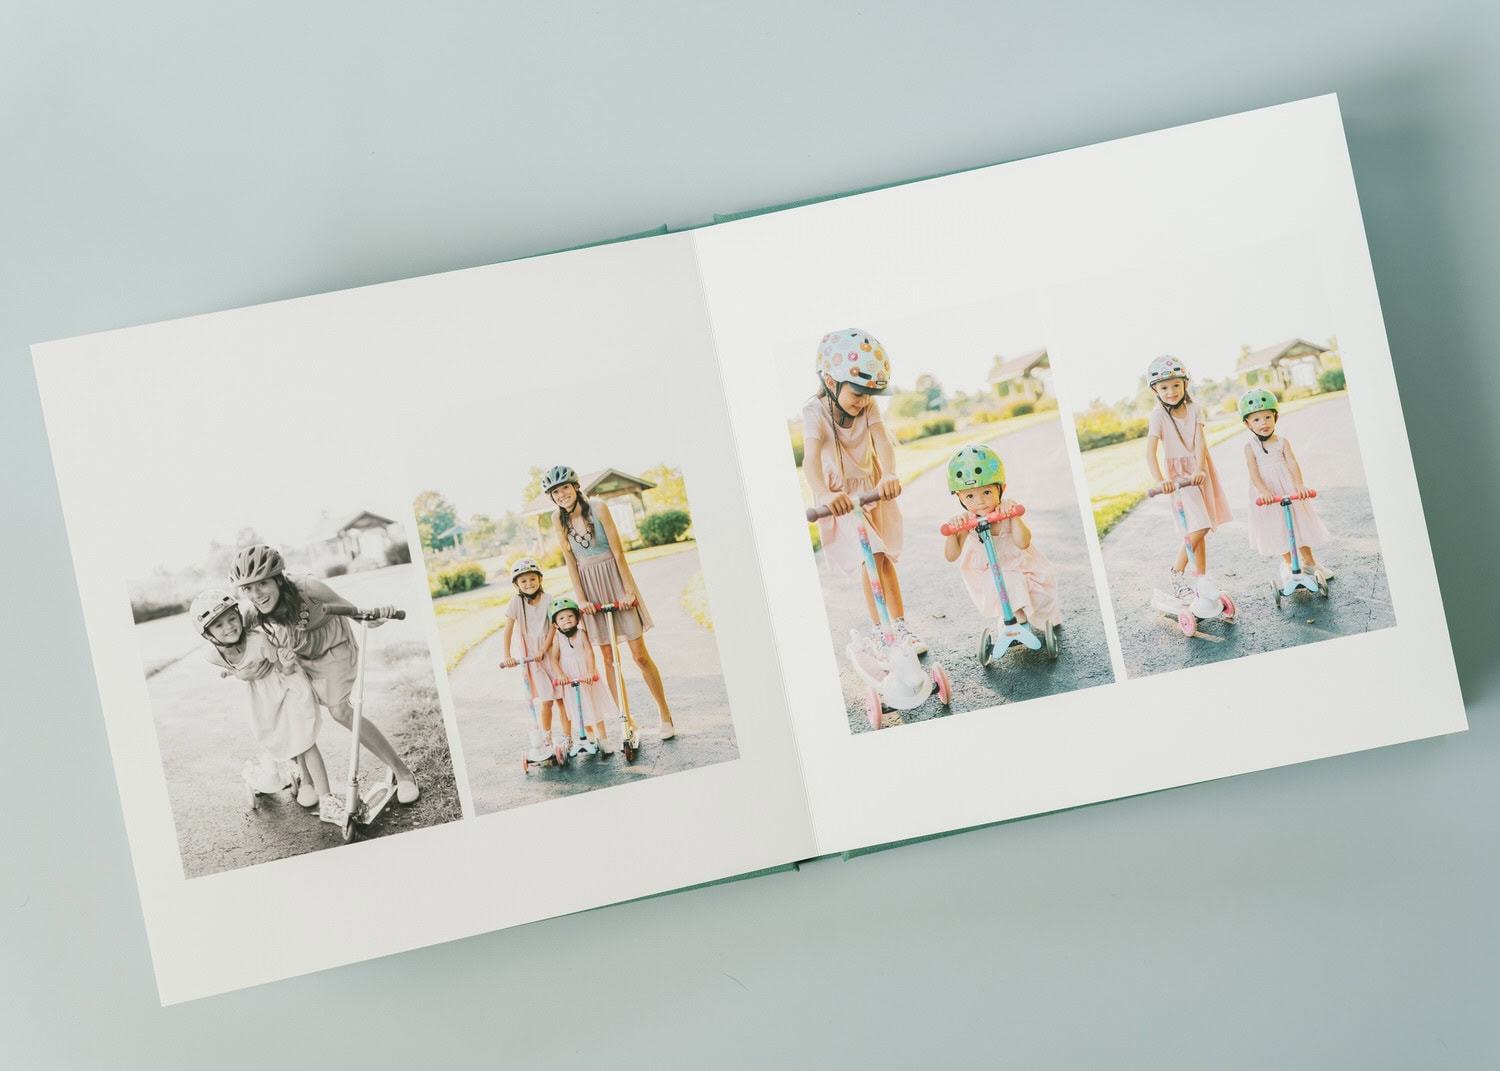 A photo album containing pictures of two sisters riding their scooters